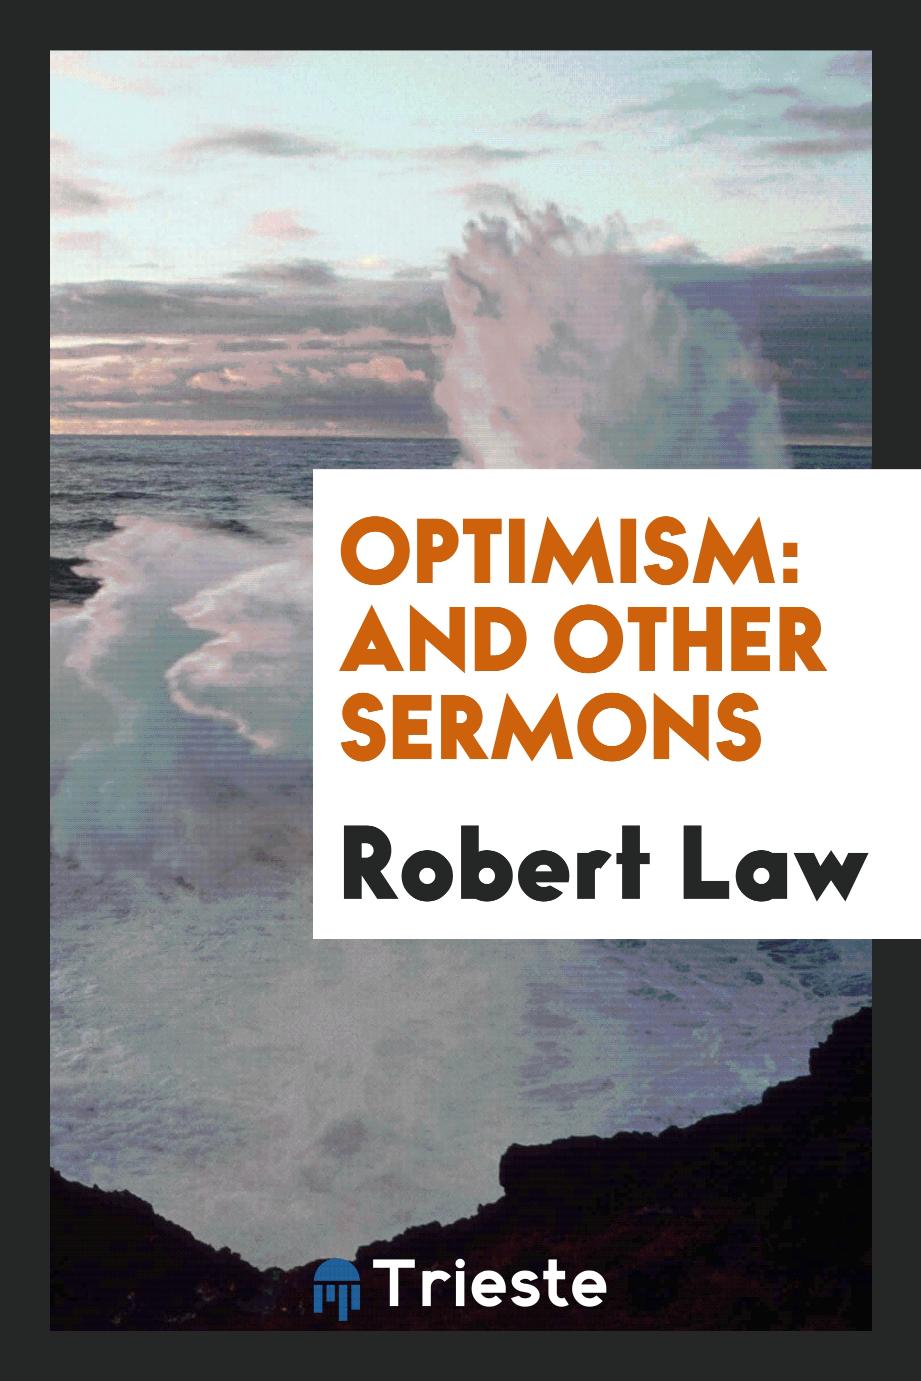 Optimism: and other sermons